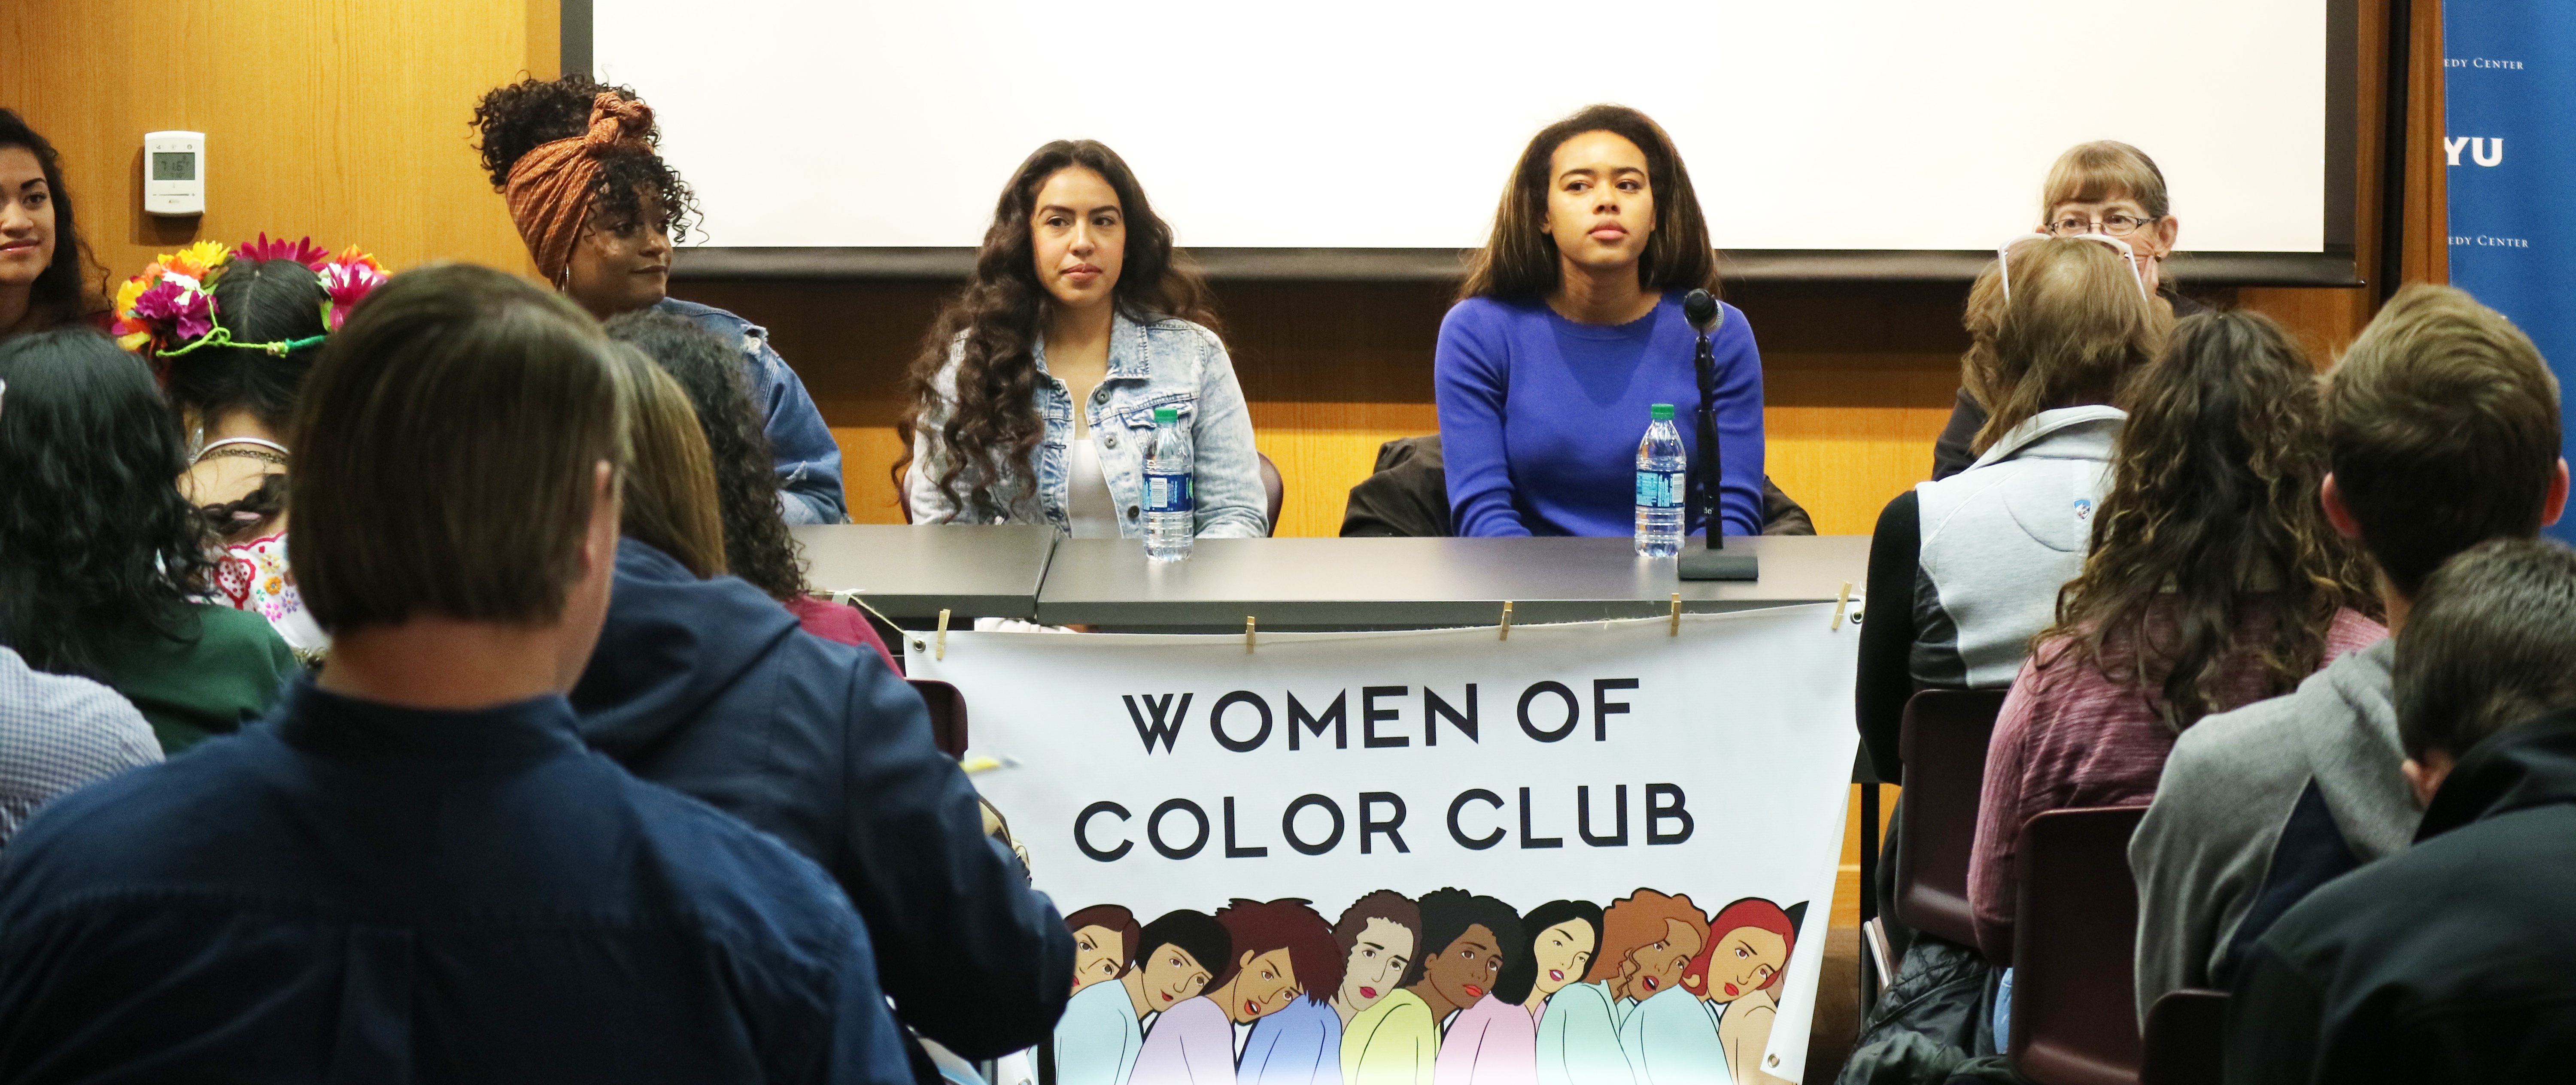 Byu Women Of Color Club Aims For A More Diverse Campus The Daily Universe